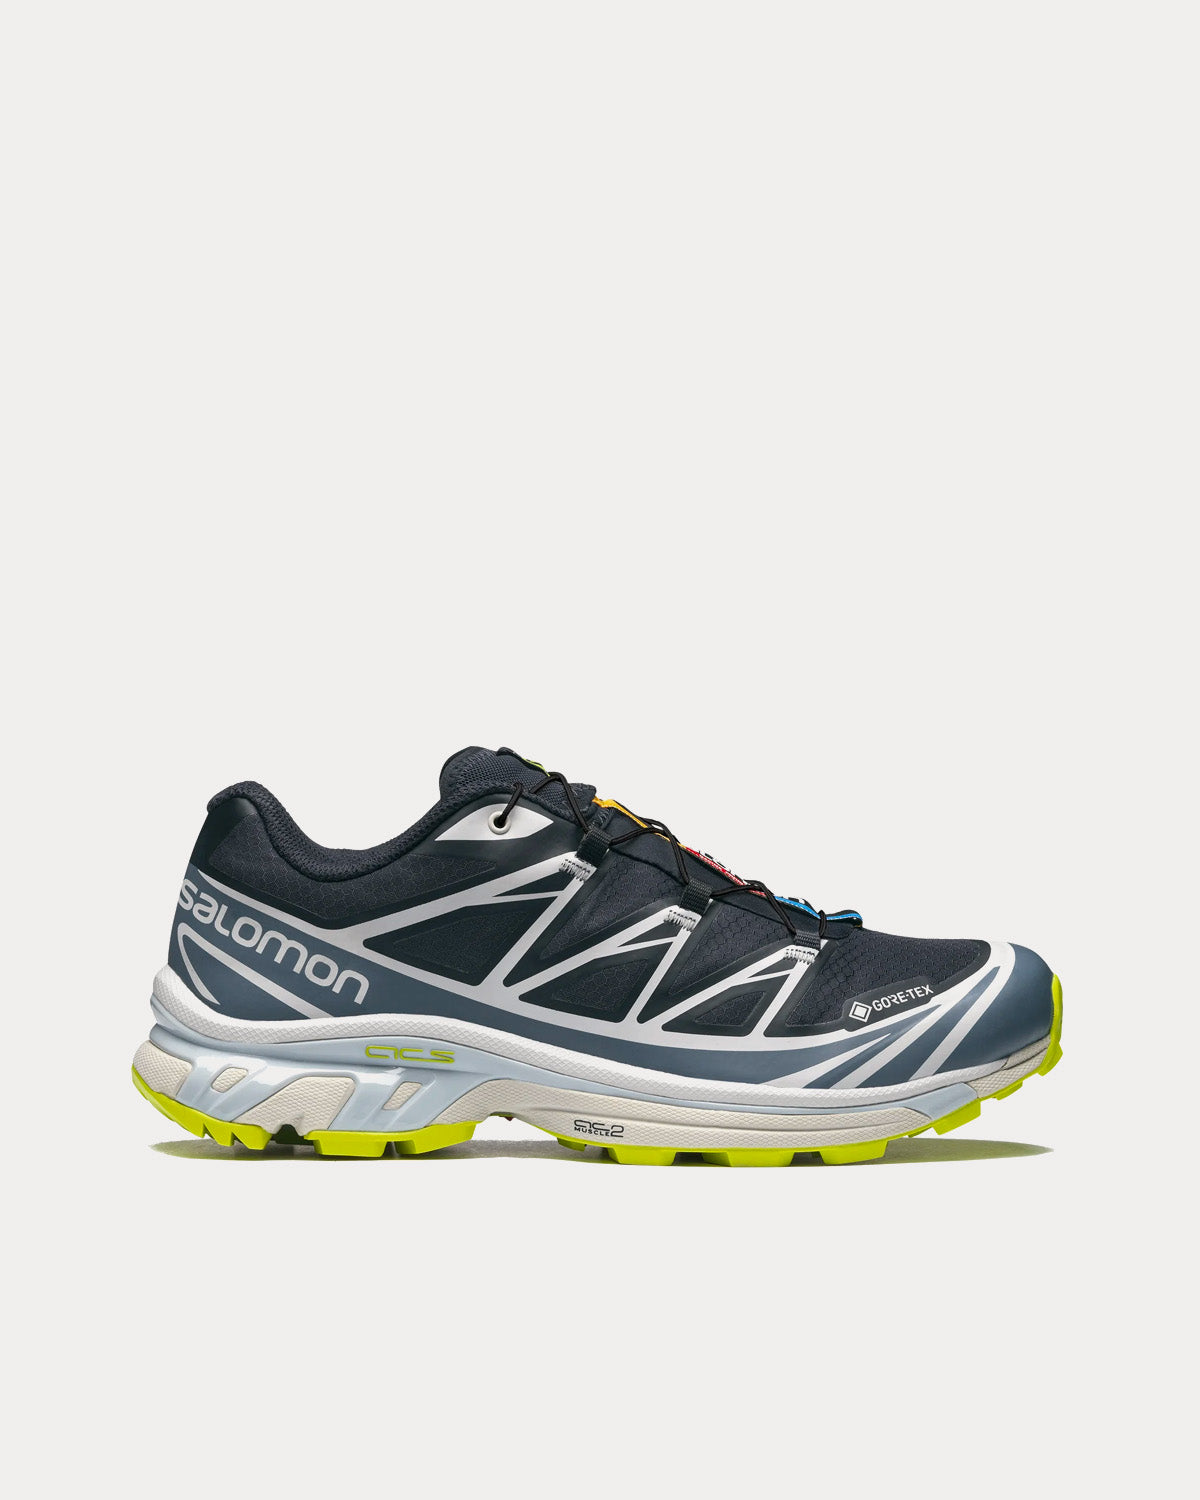 Messing Reageren kwaliteit Salomon XT-6 Gore-Tex Night Sky / China Blue / Acid Lime Low Top Sneakers -  Sneak in Peace